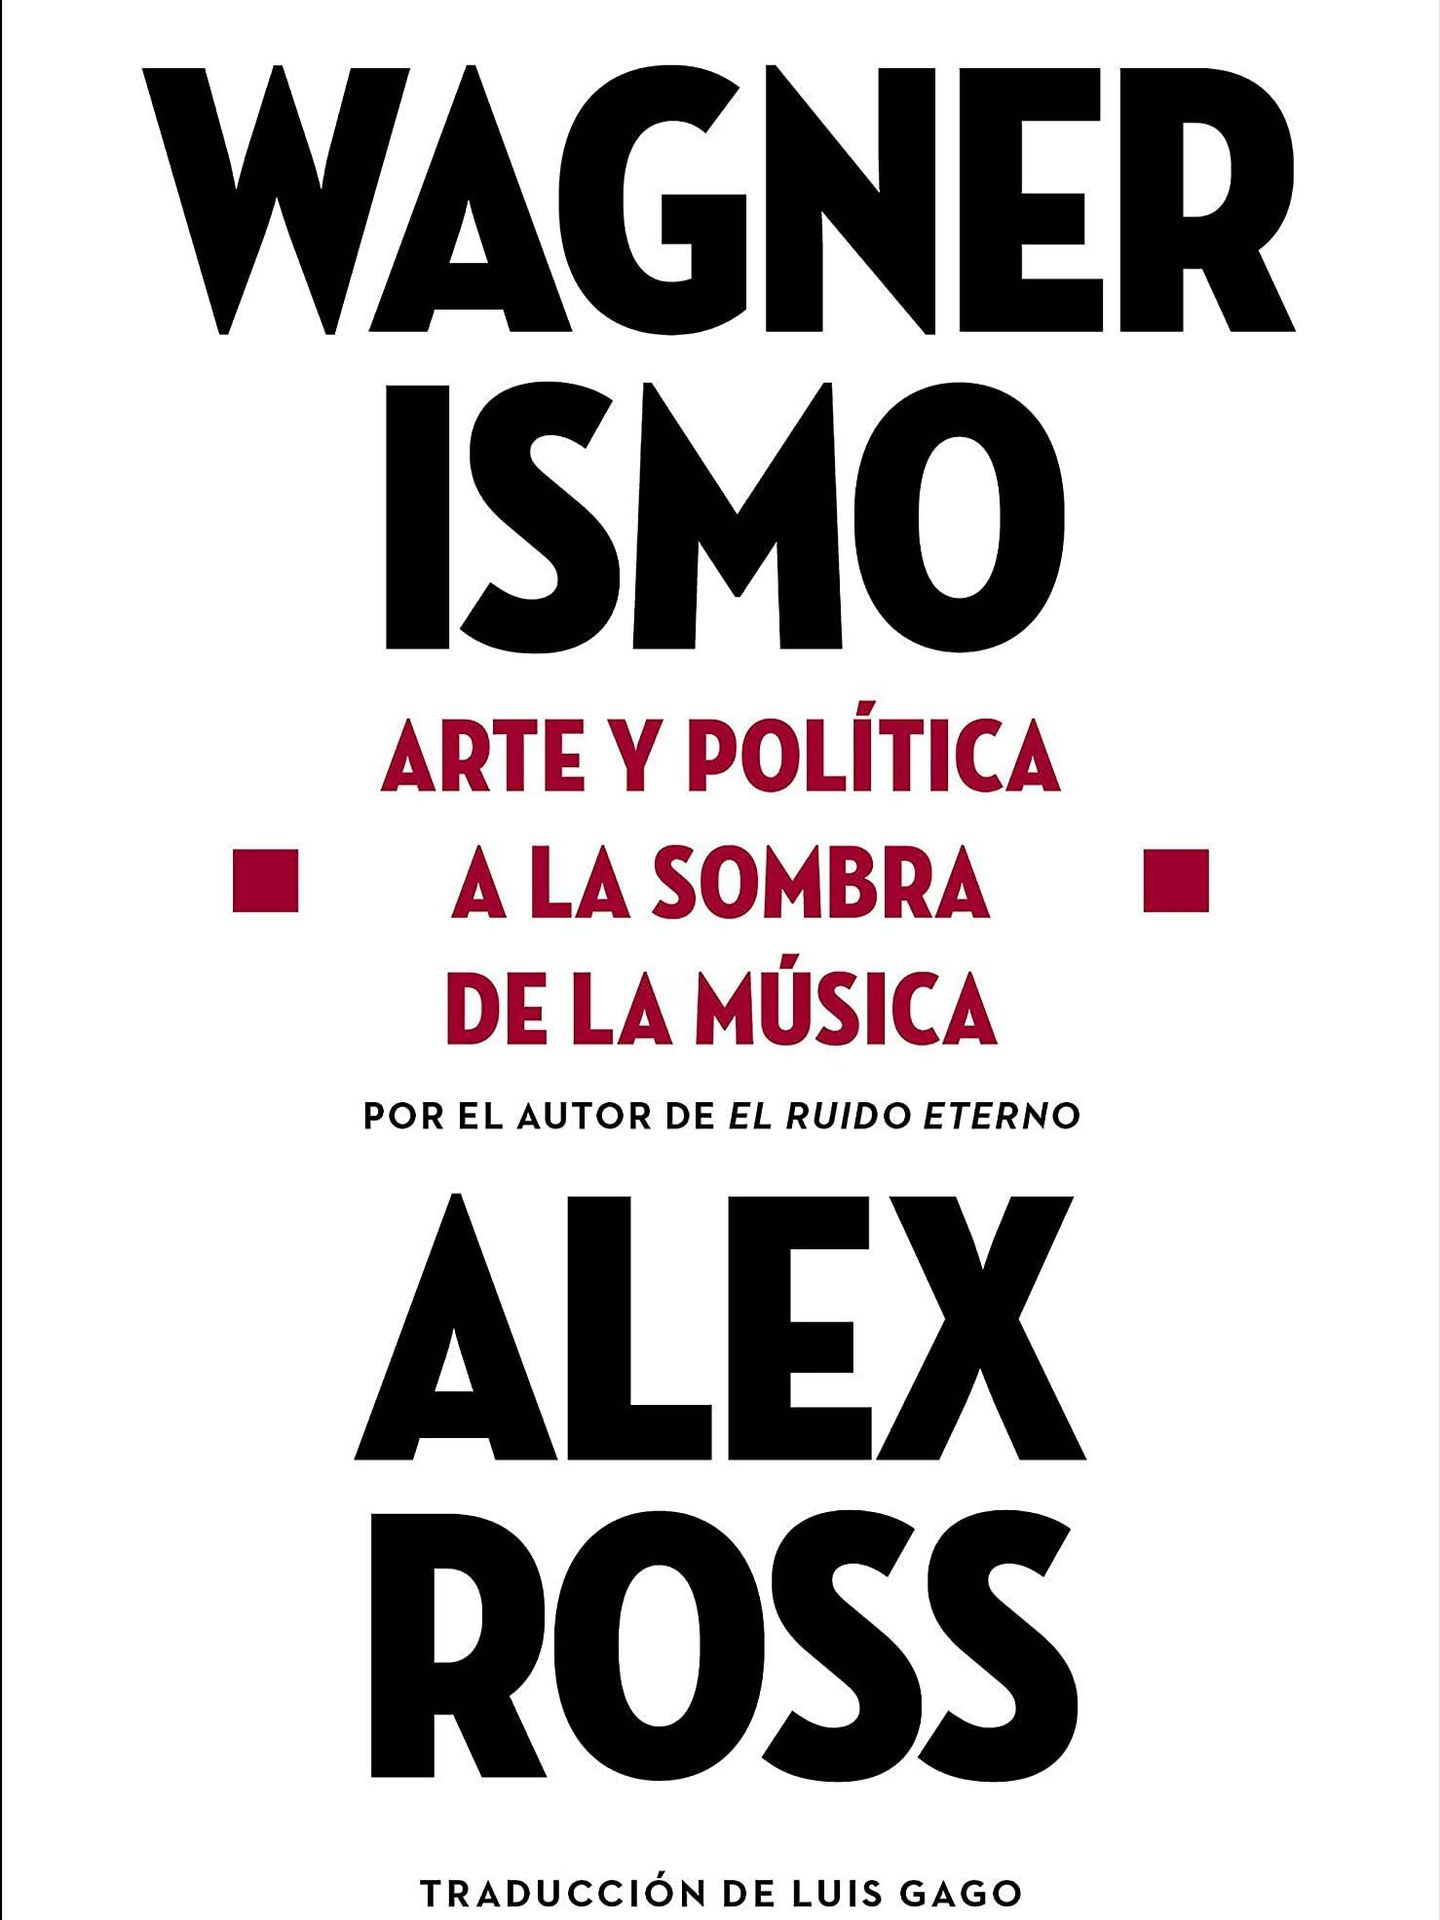 'Wagnerismo'.